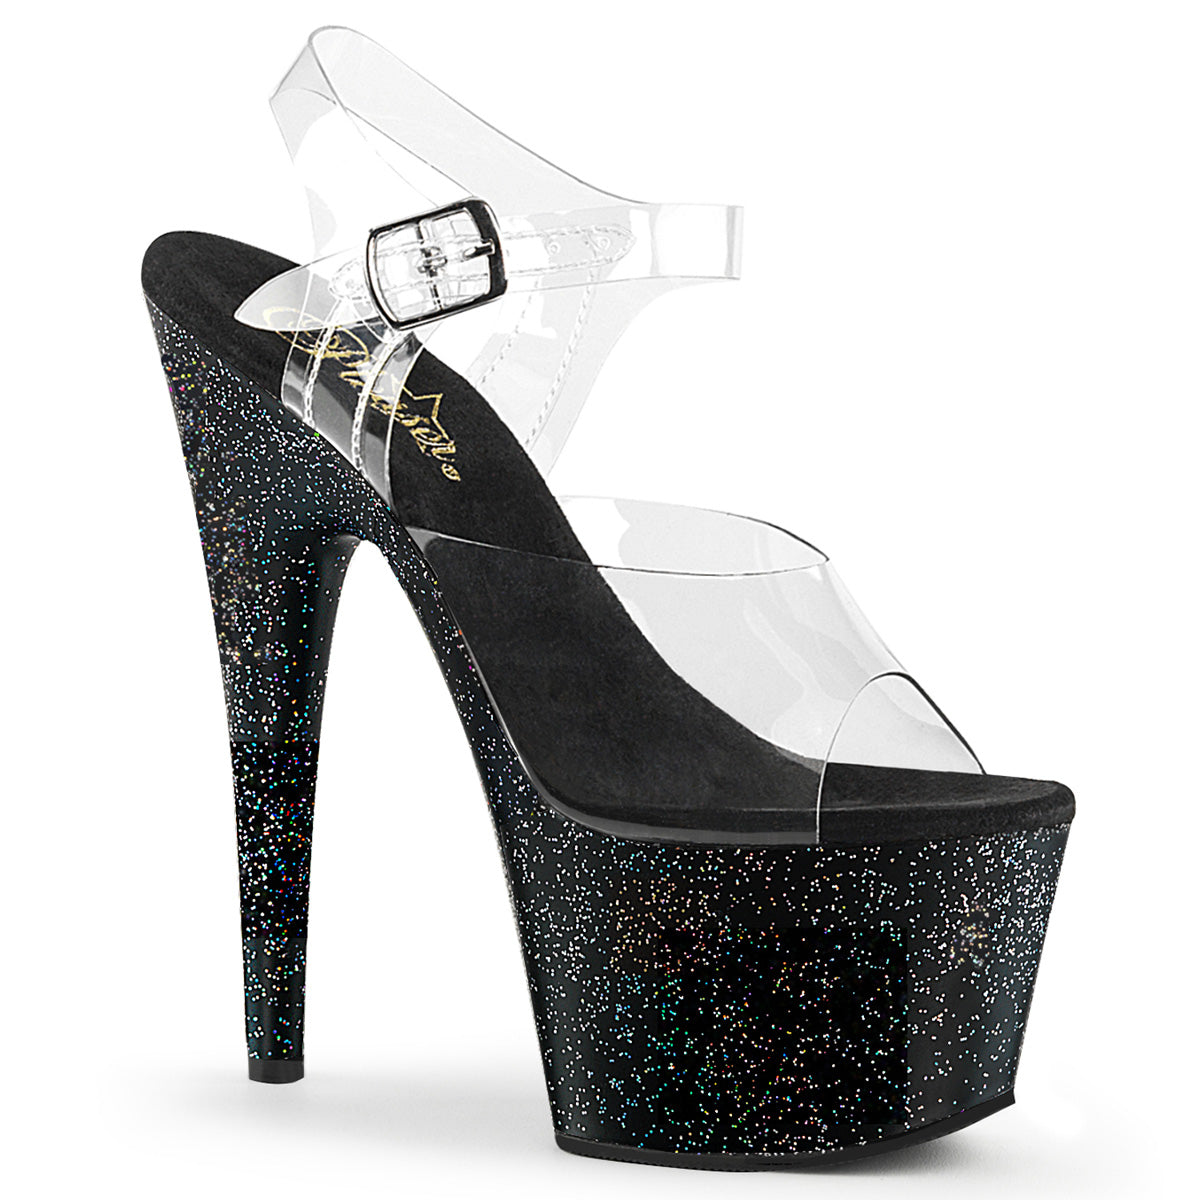 Adore-708mg 7 "Heel Clear and Black Pole Dancing Shoes